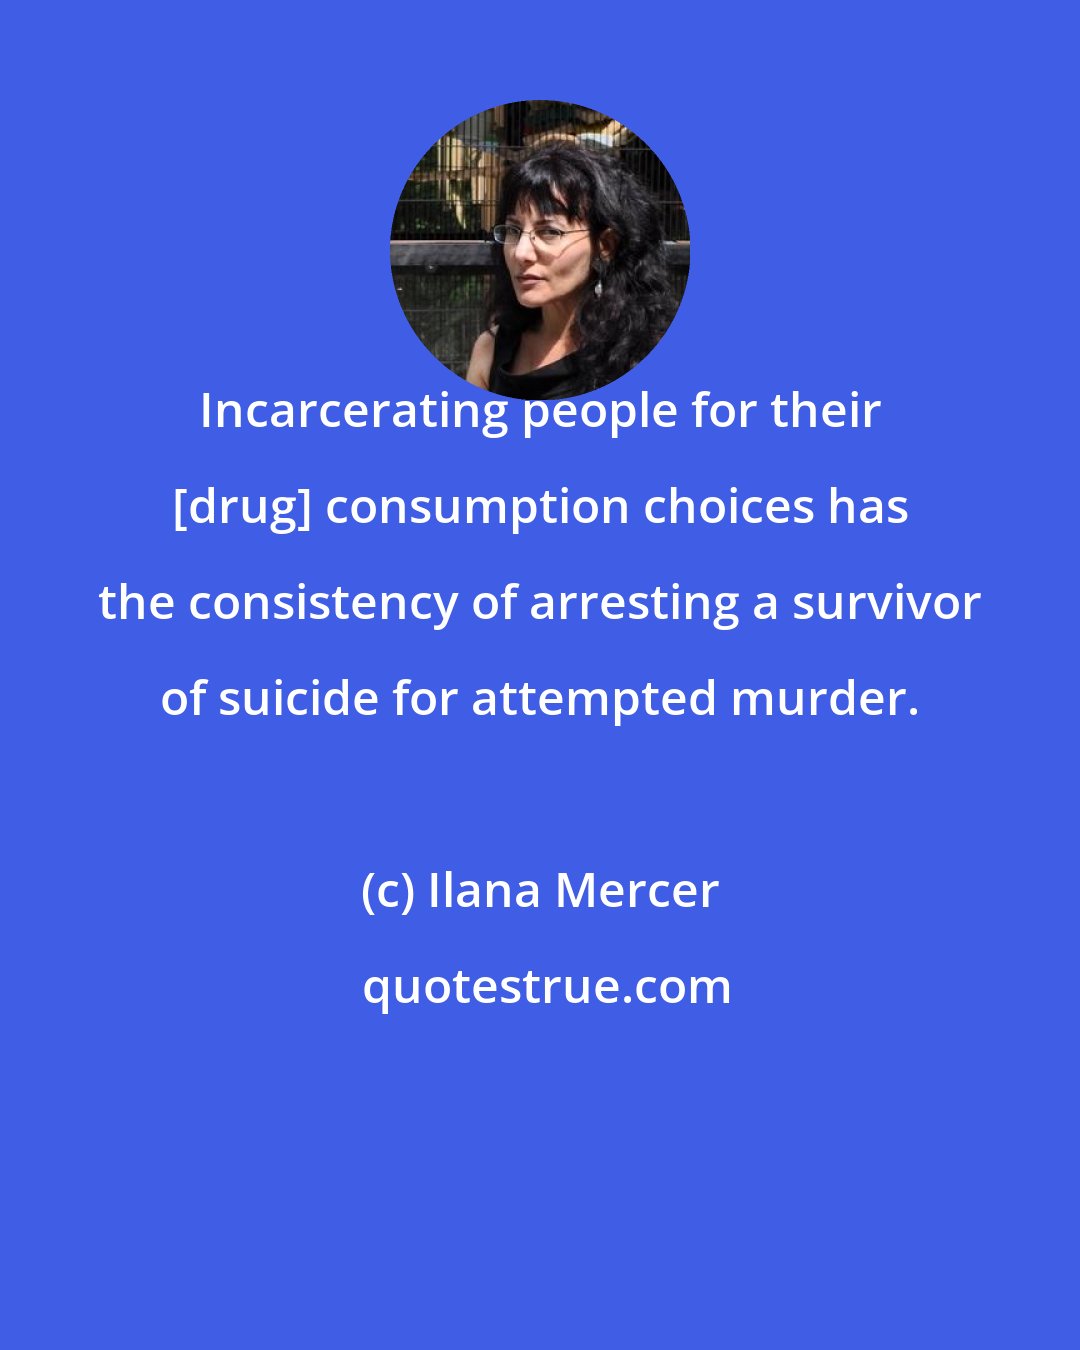 Ilana Mercer: Incarcerating people for their [drug] consumption choices has the consistency of arresting a survivor of suicide for attempted murder.